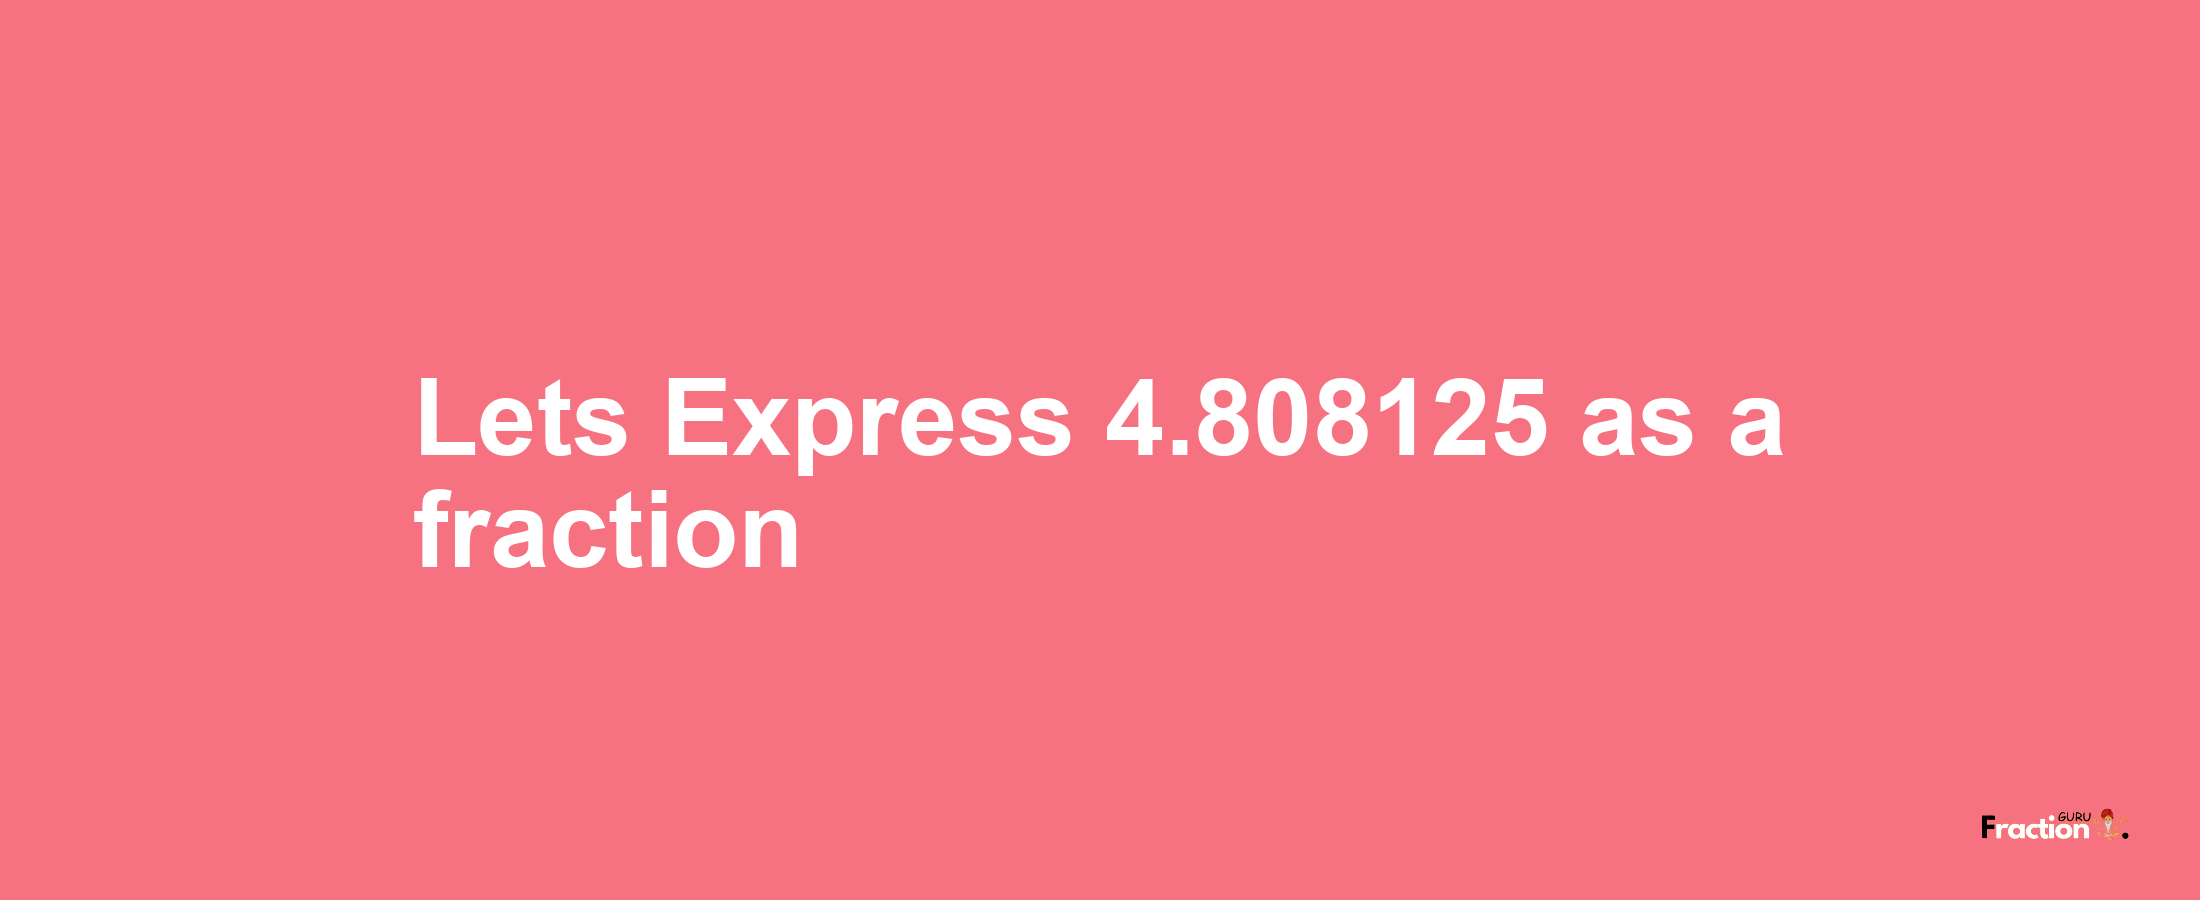 Lets Express 4.808125 as afraction